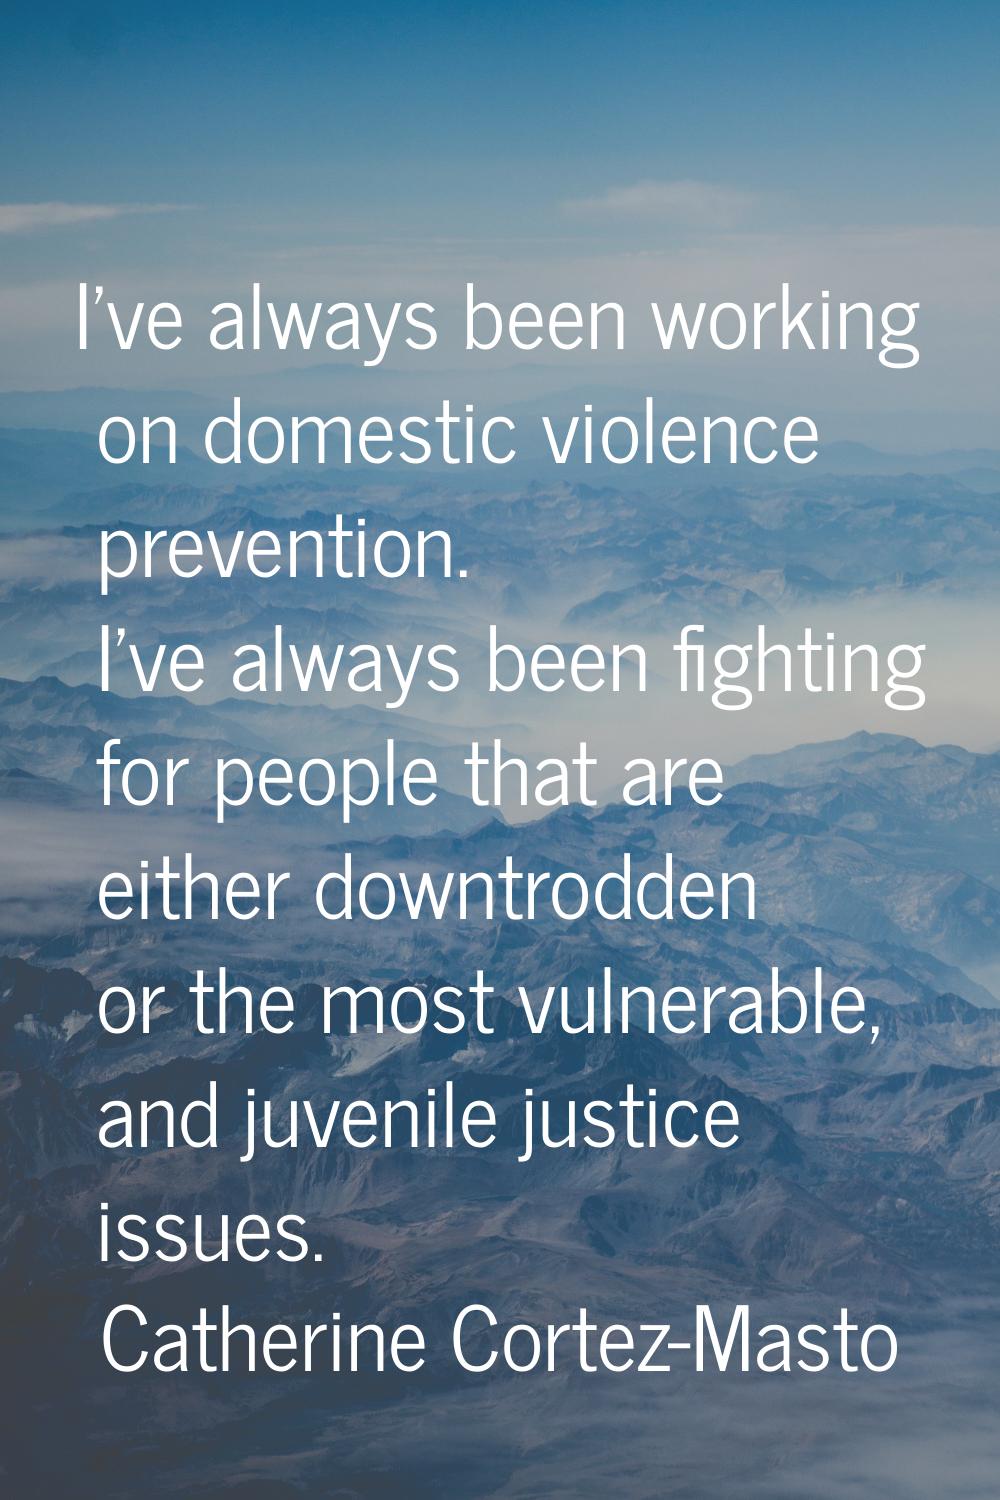 I've always been working on domestic violence prevention. I've always been fighting for people that